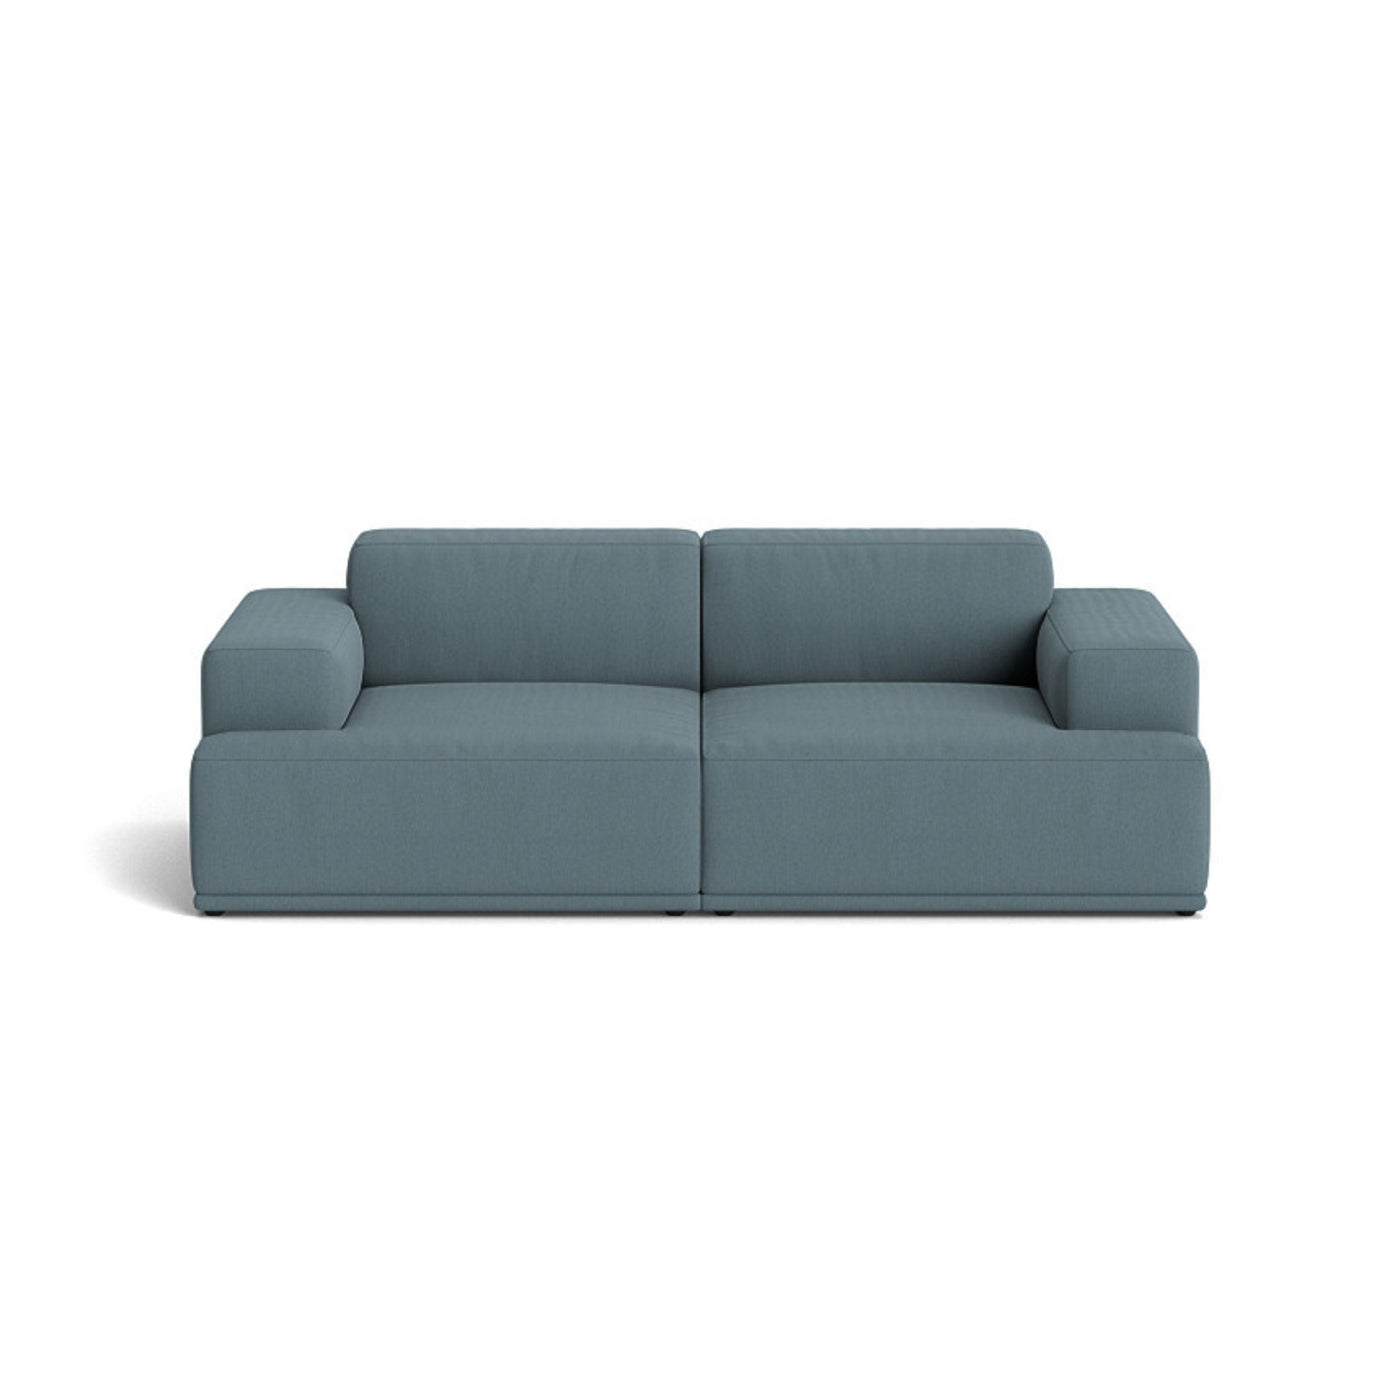 Muuto Connect Soft Modular 2 Seater Sofa, configuration 1. made-to-order from someday designs. #colour_re-wool-768